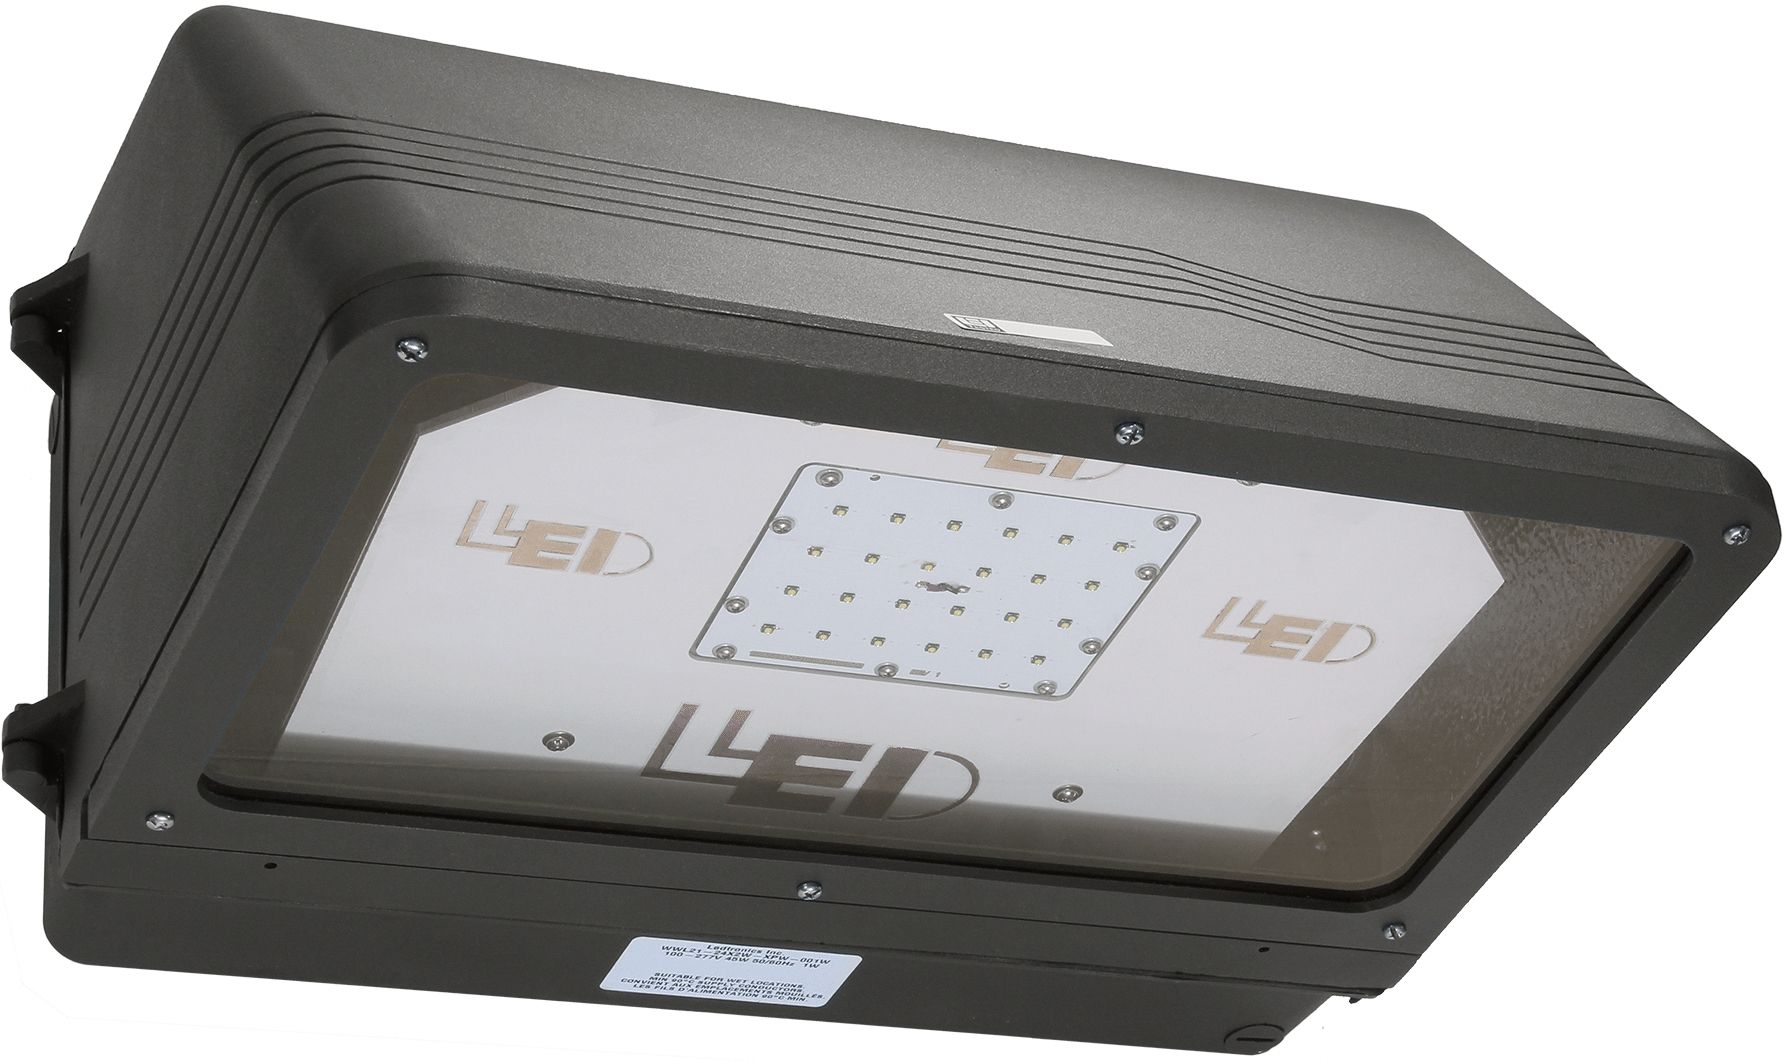 Elegant Outdoor Wall Mounted Flood Lights 89 For Led Flood Lights Throughout Outdoor Wall Flood Lights (View 13 of 15)